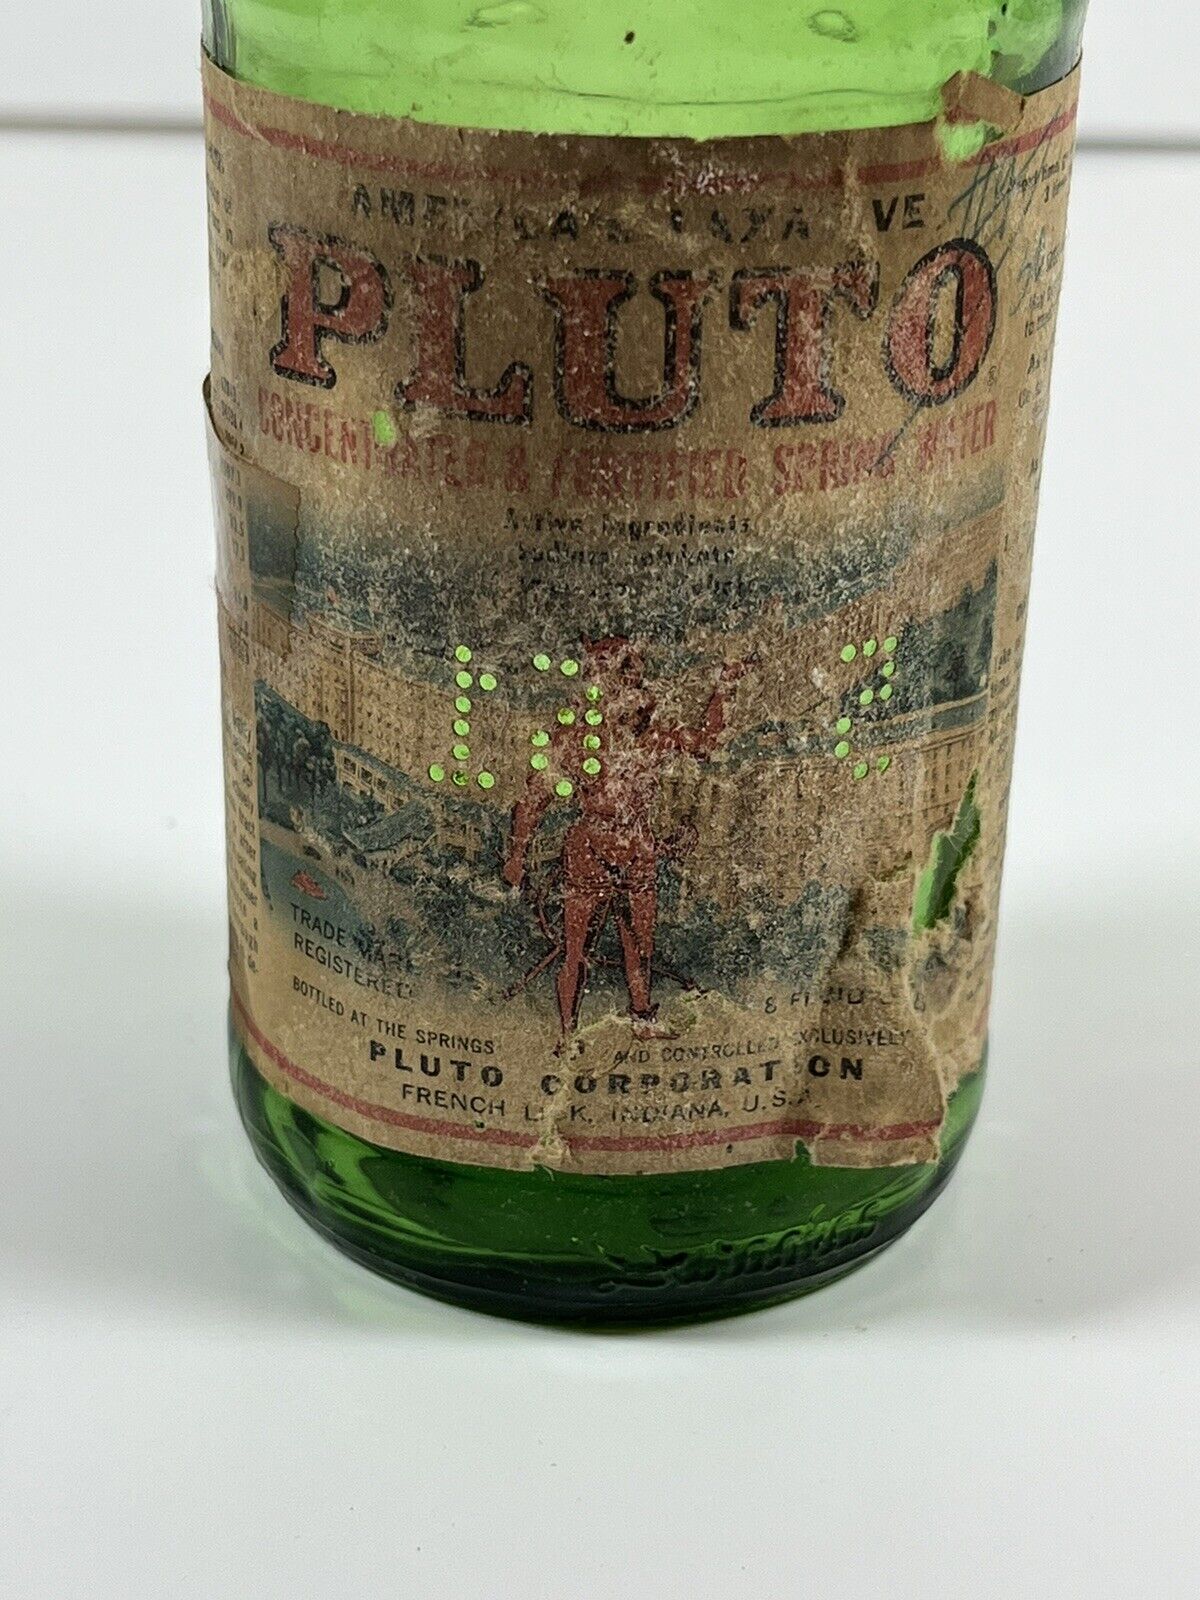 Pluto Water Americas Laxative French Lick Indiana Green Glass Bottle  VTG TLC